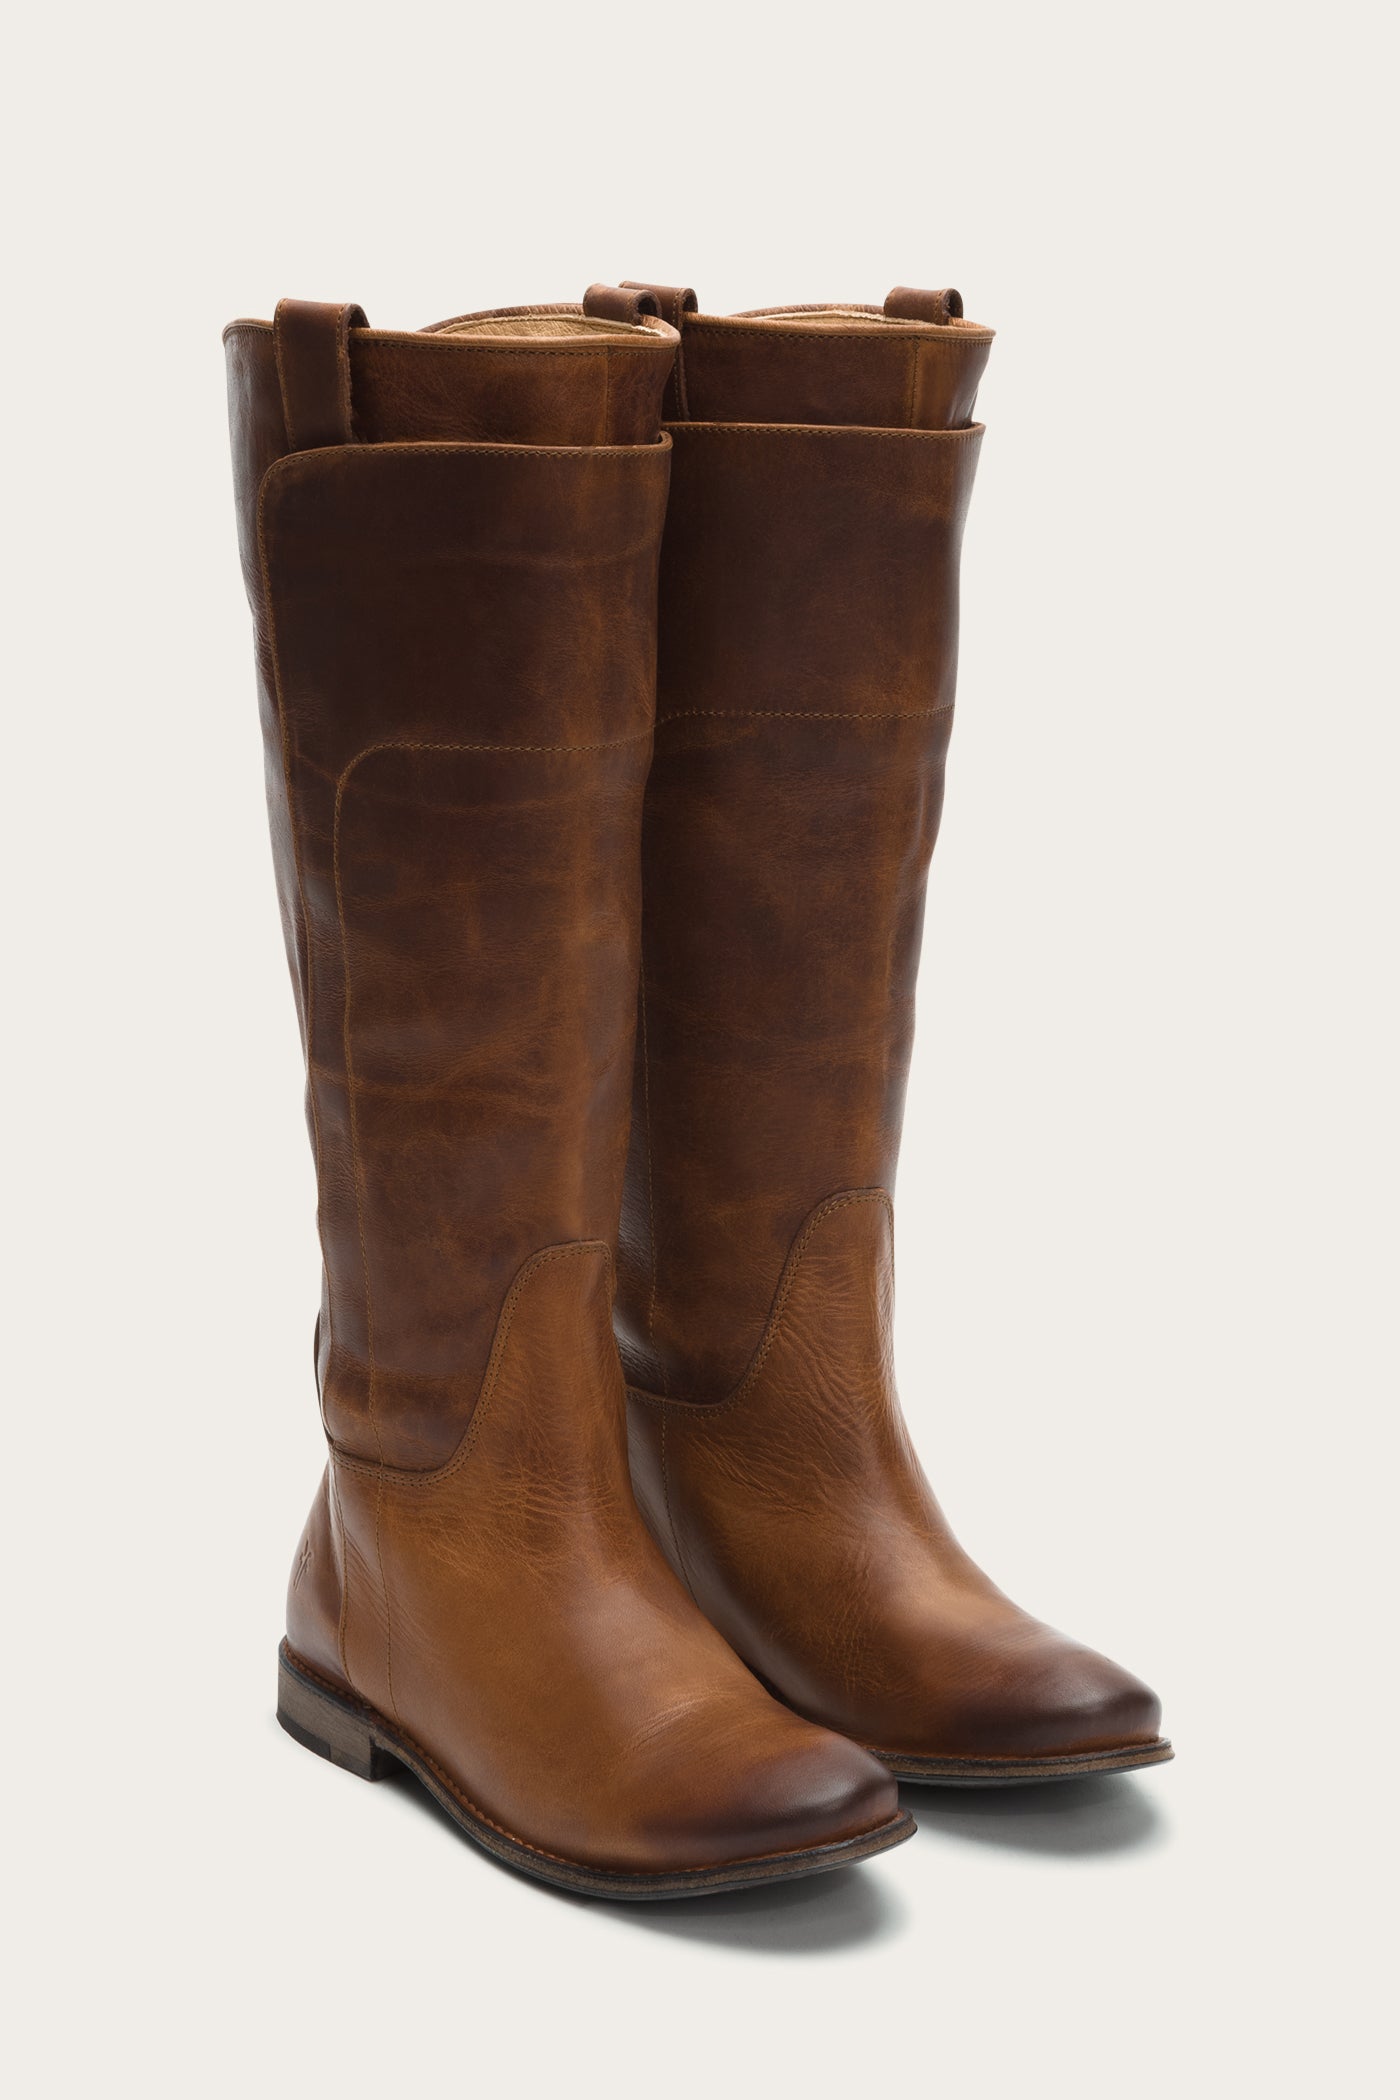 frye boots paige tall riding sale